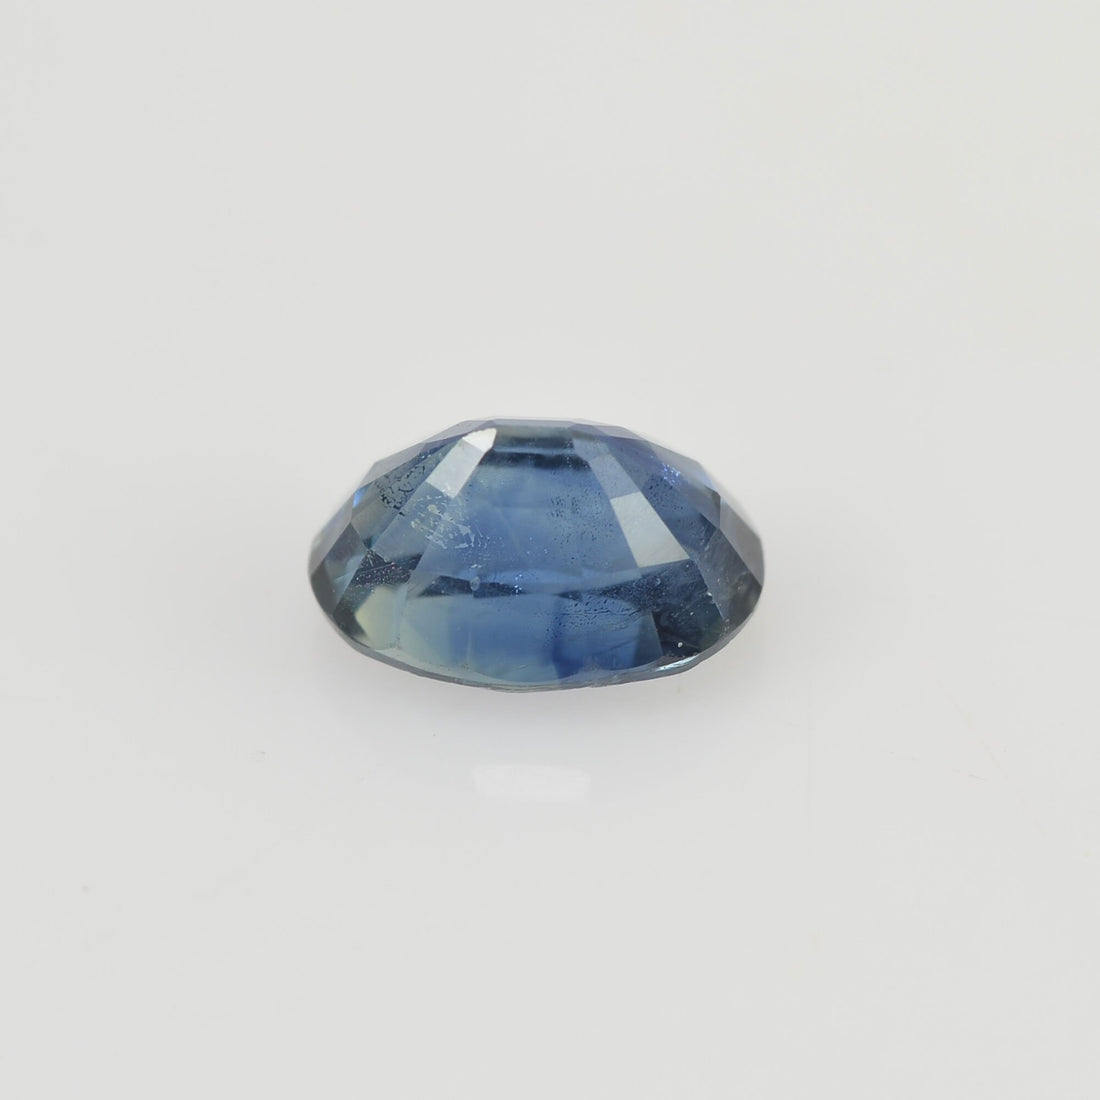 0.70 cts Natural Blue Green Teal Sapphire Loose Gemstone Oval Cut